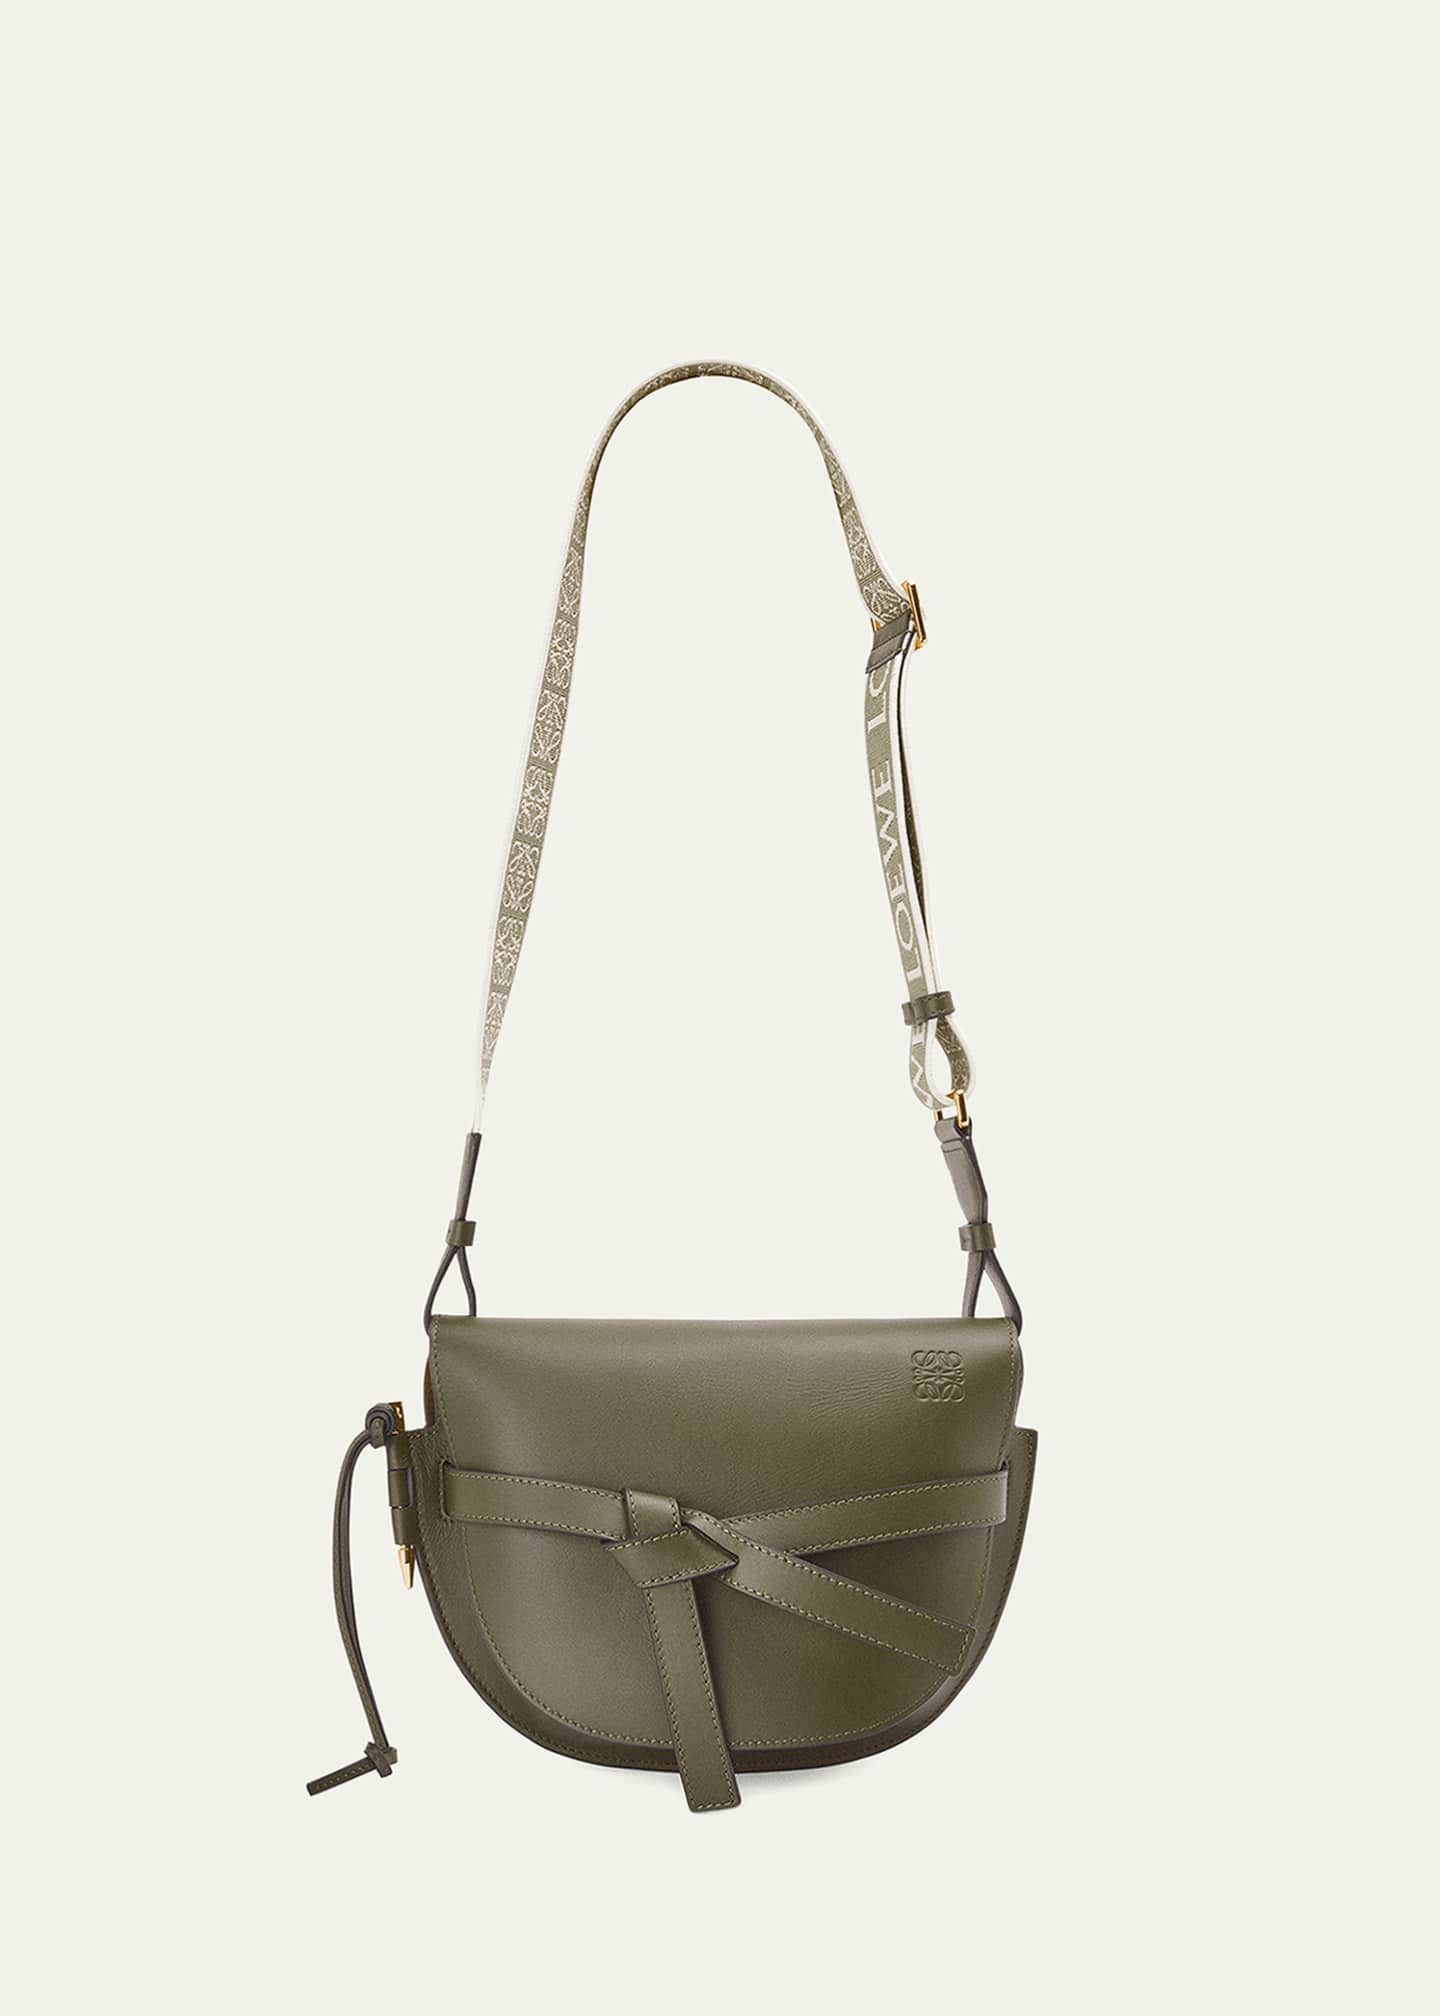 Loewe Gate Small Leather and Jacquard Shoulder Bag